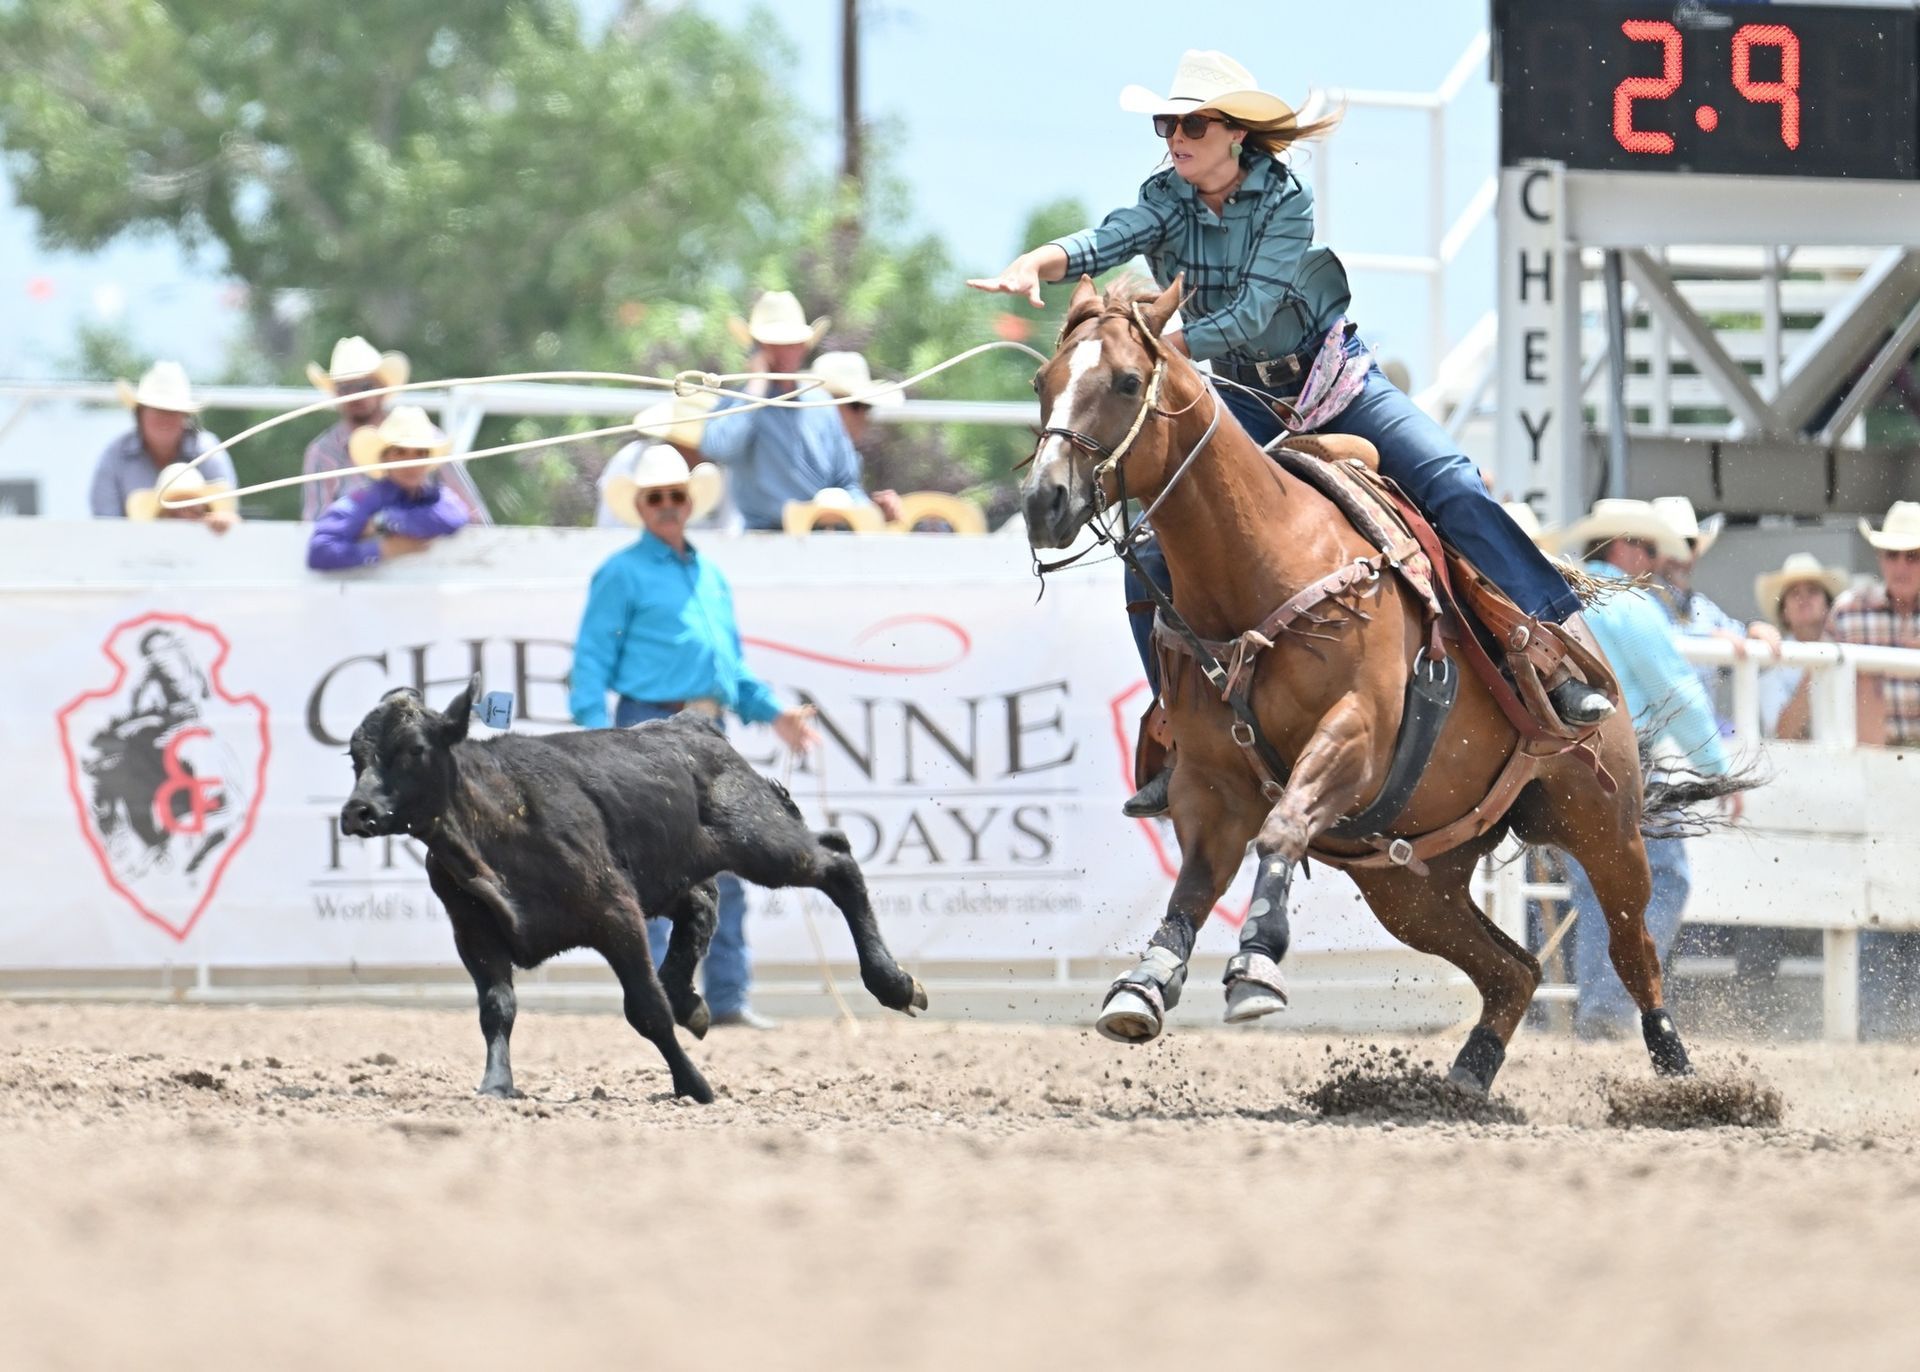 World's Largest Outdoor Rodeo and Western Celebration, world record in Cheyenne, Wyoming